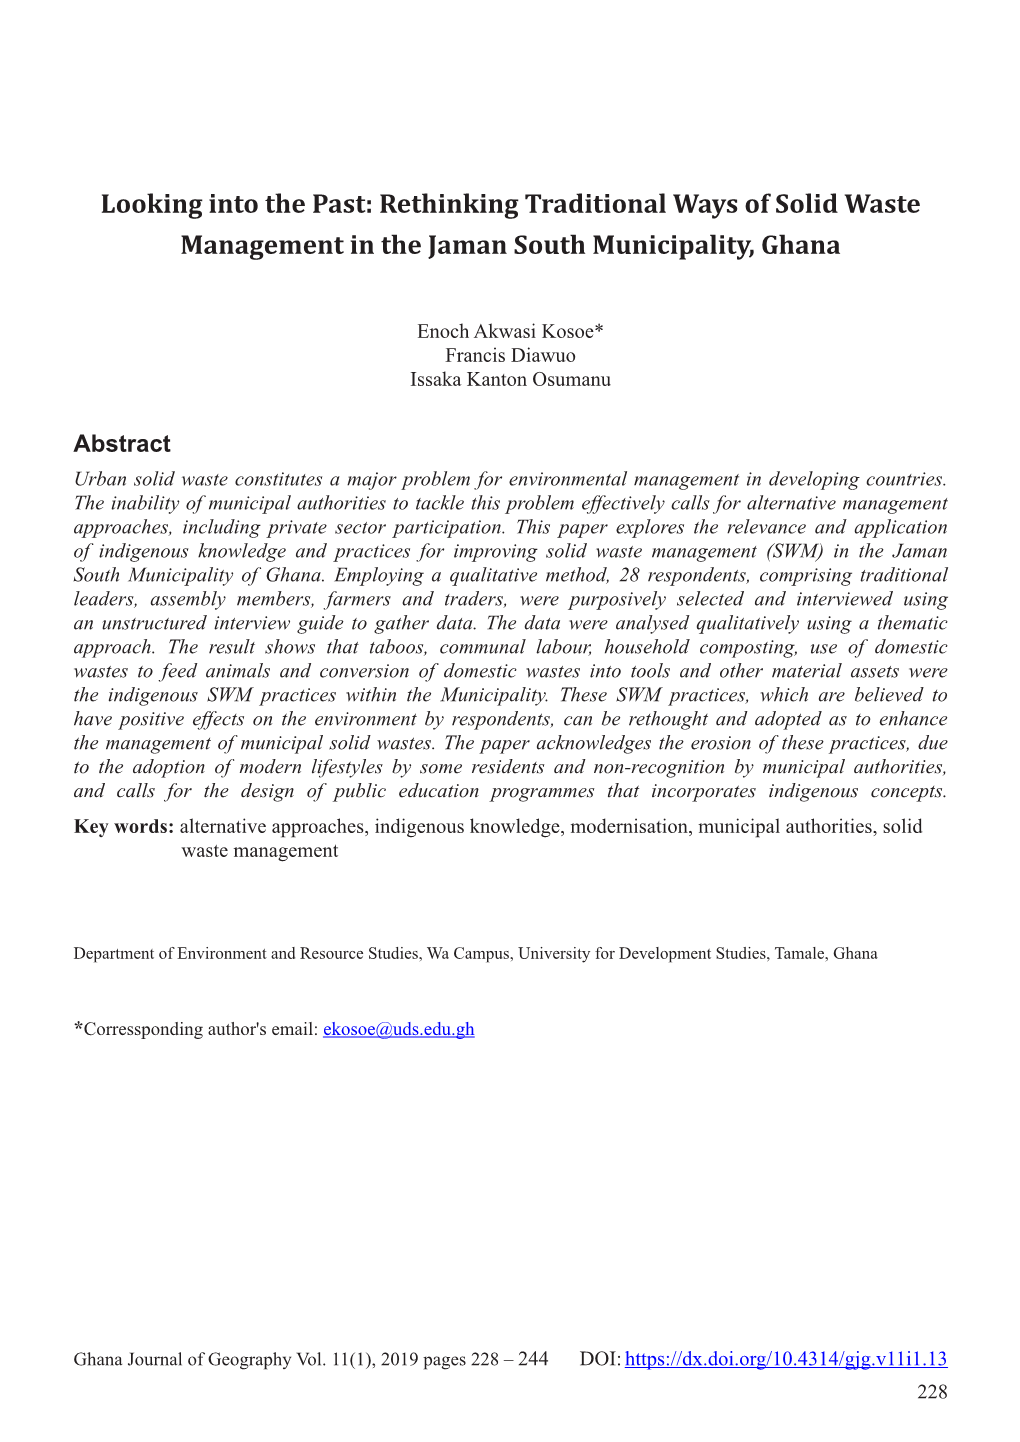 Rethinking Traditional Ways of Solid Waste Management in the Jaman South Municipality, Ghana